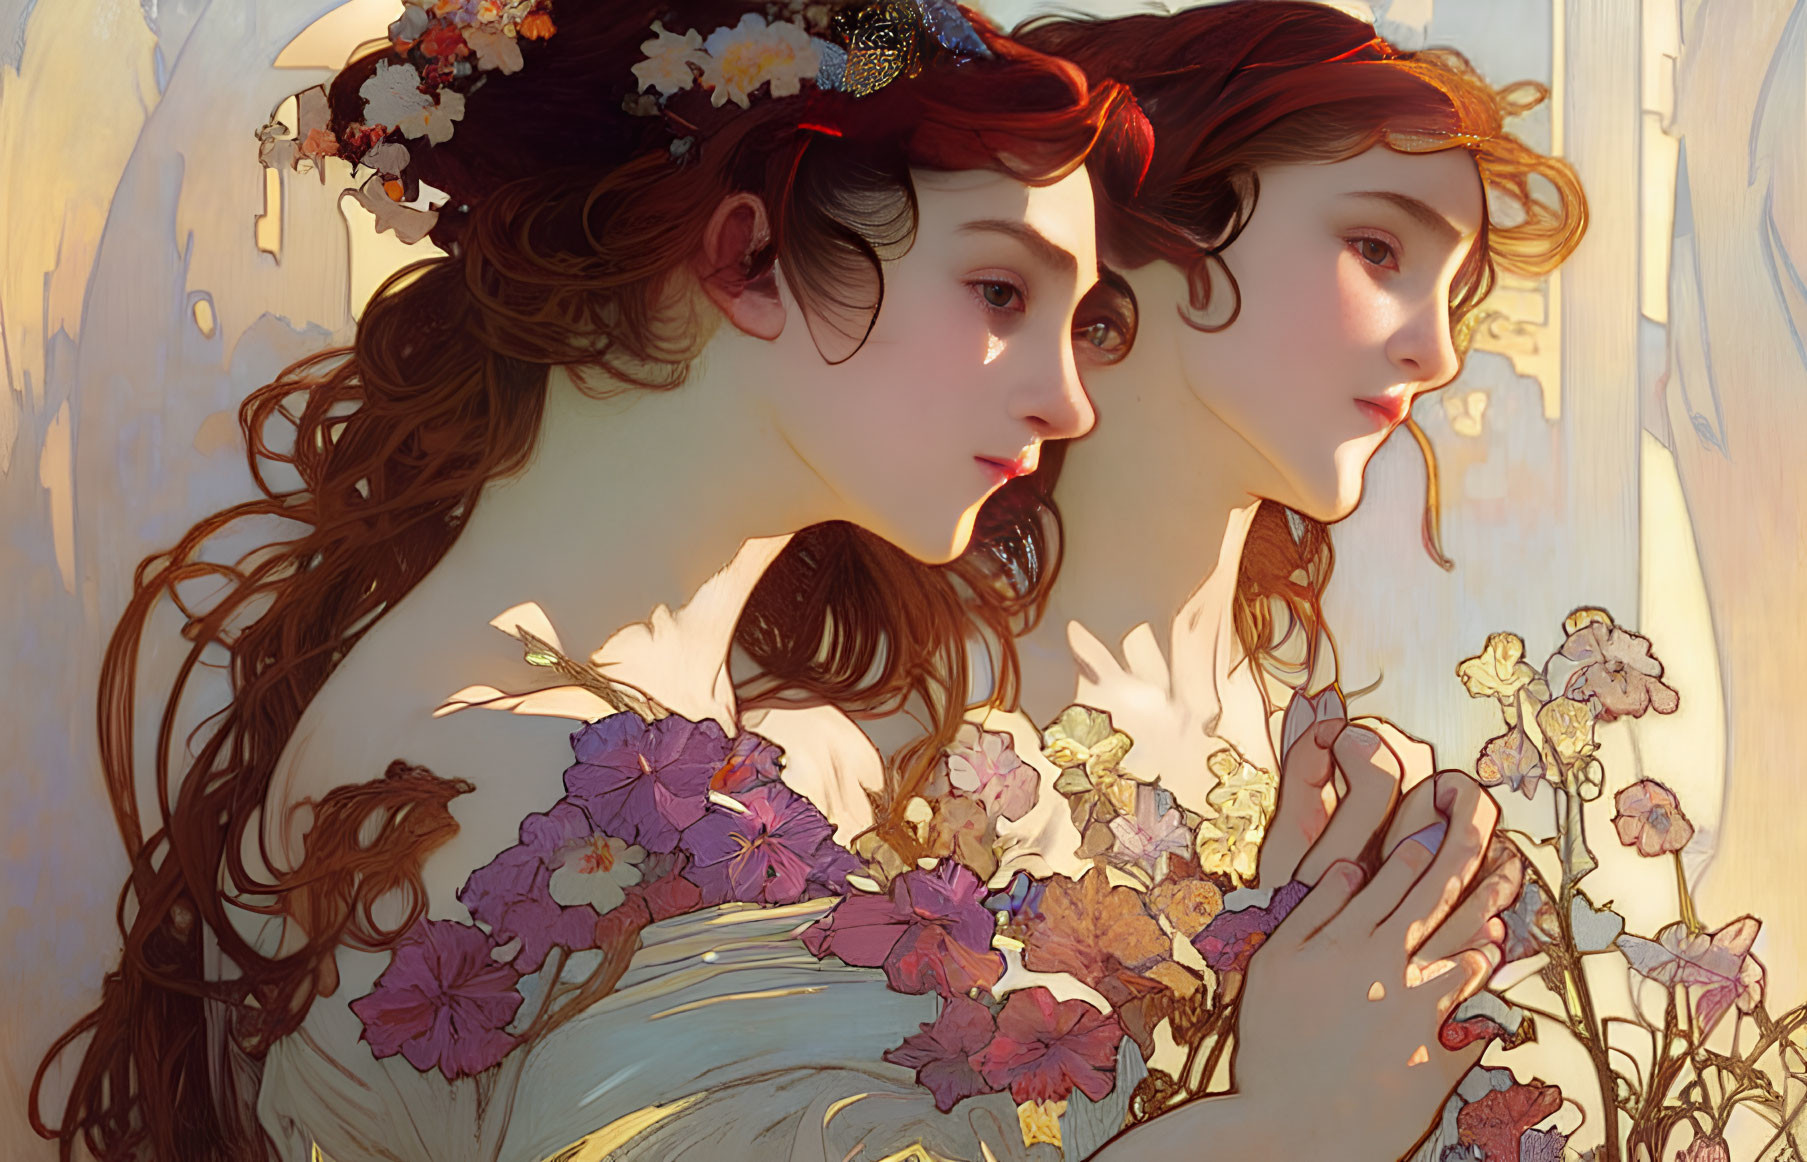 Two women with floral crowns and intricate hairstyles in warm light